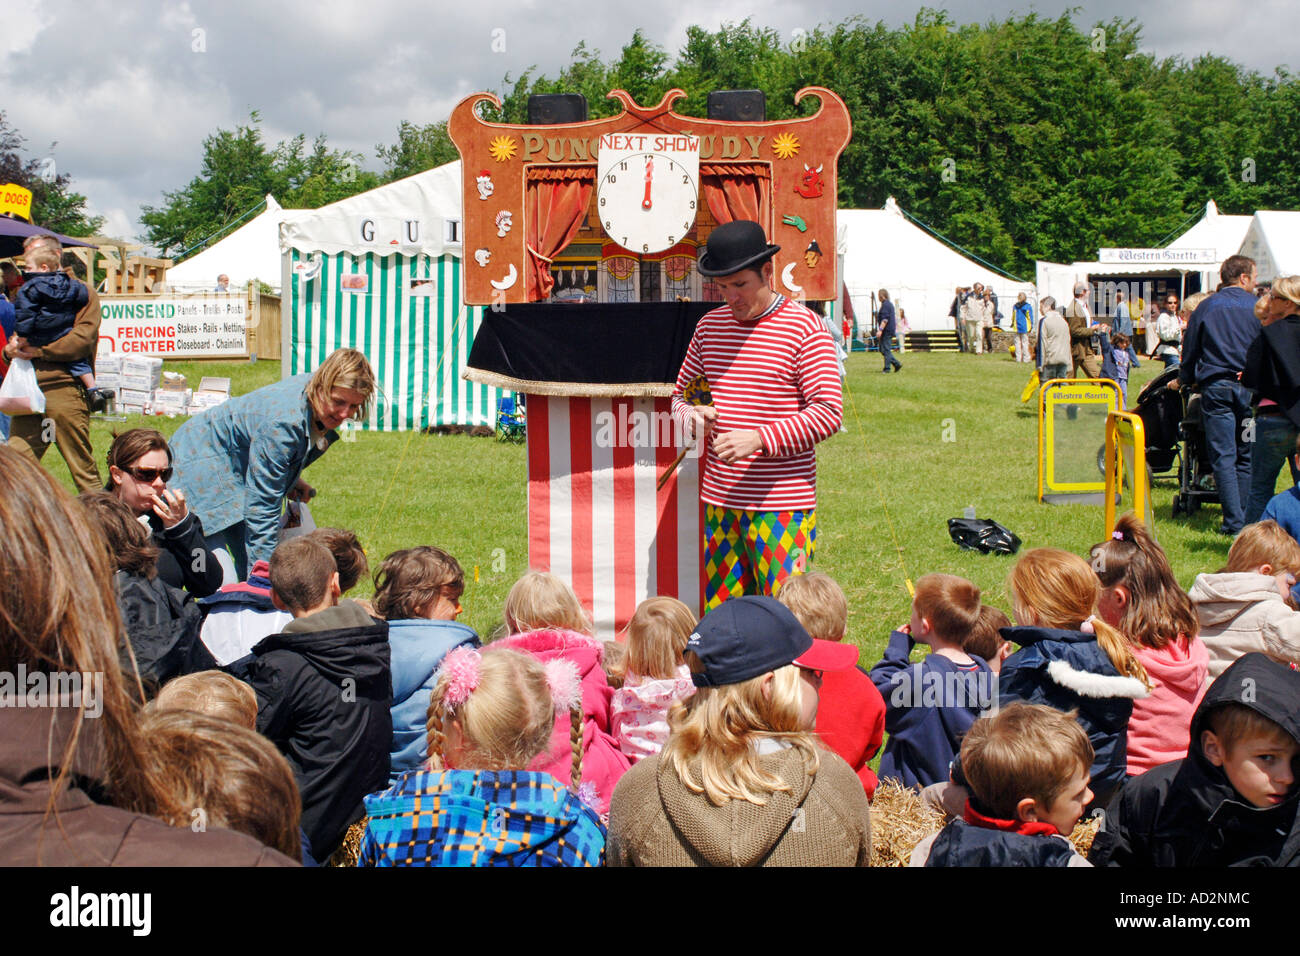 Traditional Punch and Judy show at a park festival Stock Photo